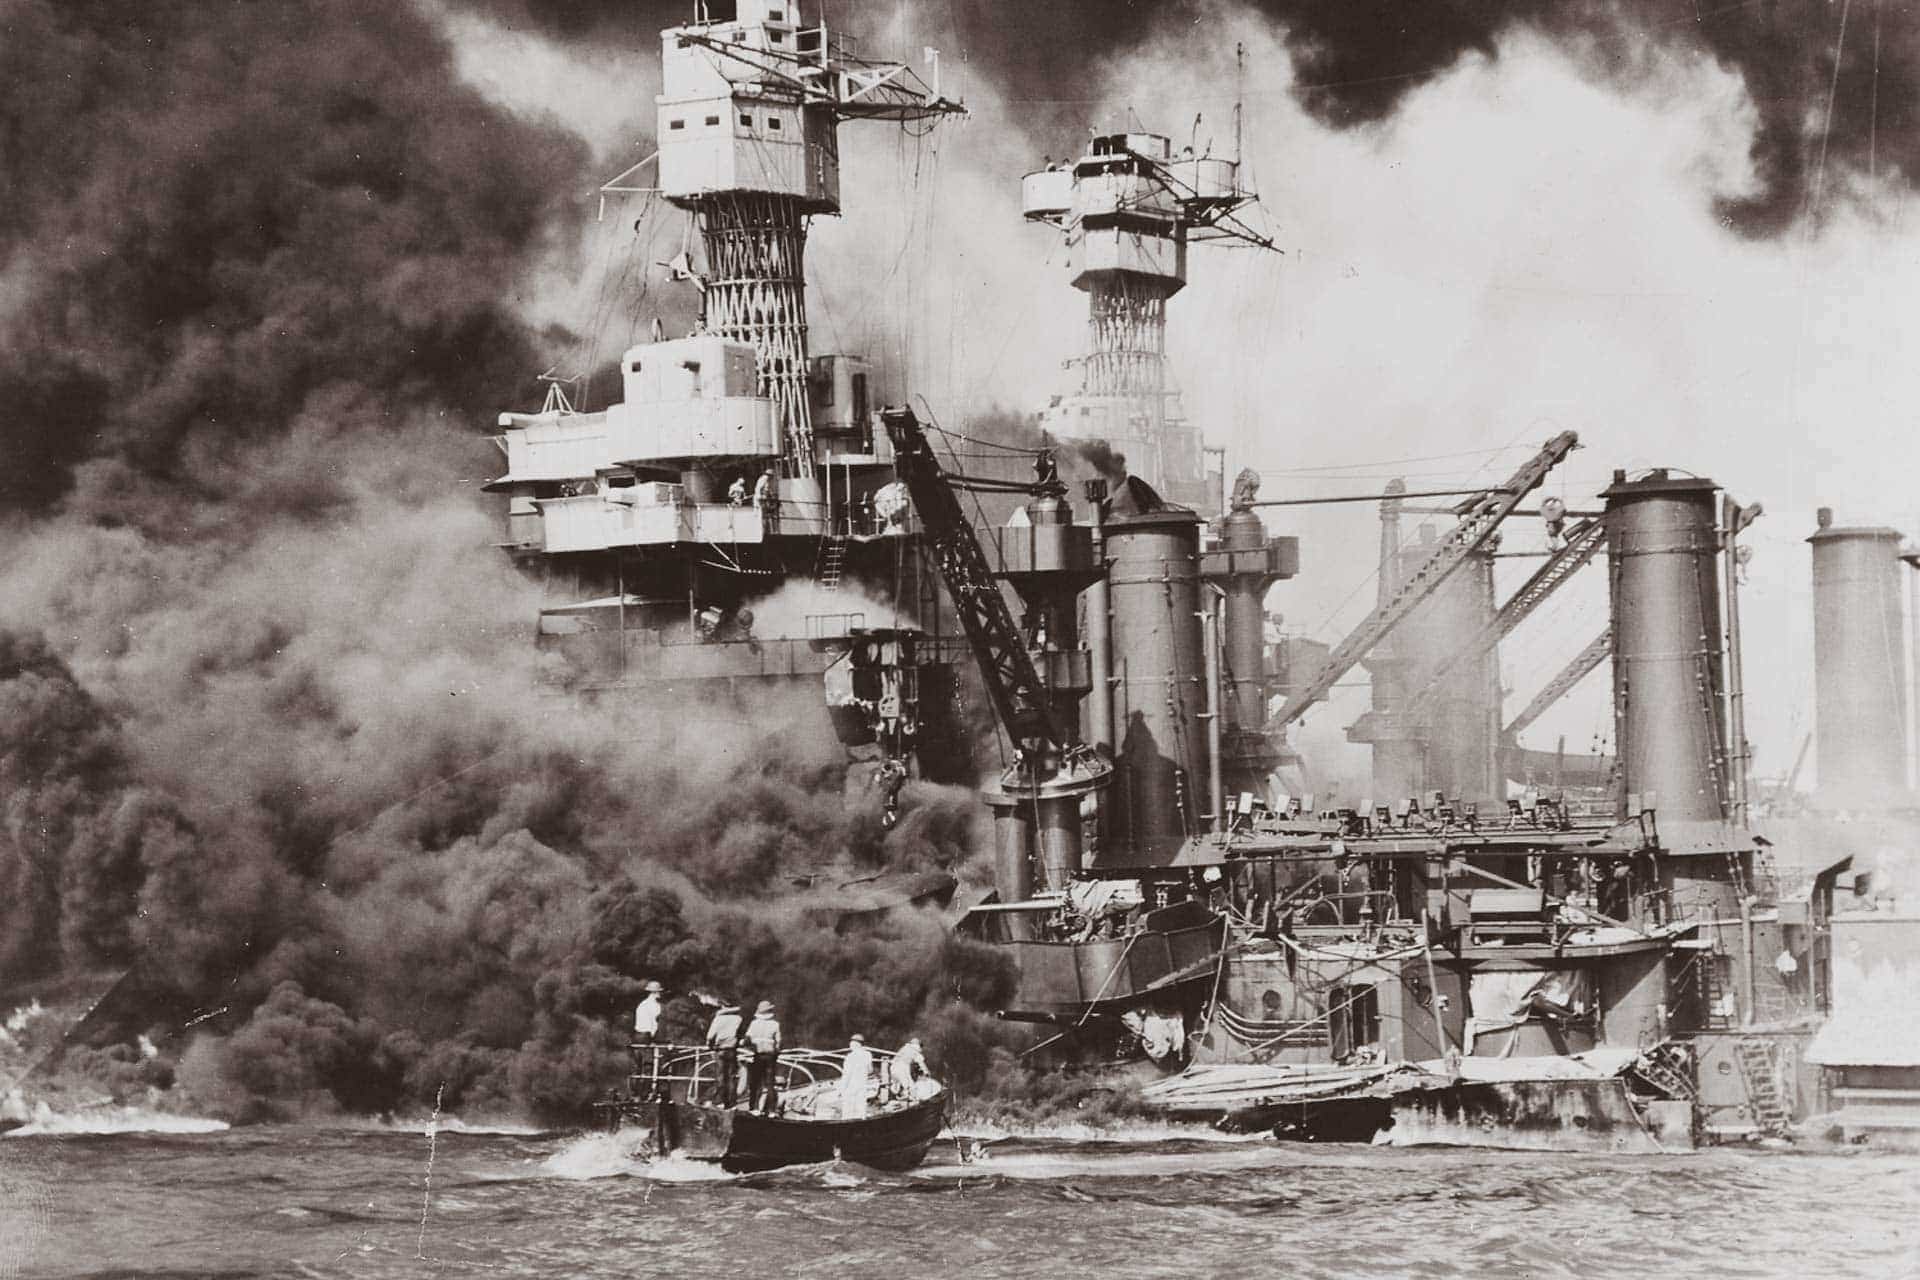 A small boat rescues a seaman from the 31,800 ton USS West Virginia after the attack on Pearl Harbor, December 7, 1941.